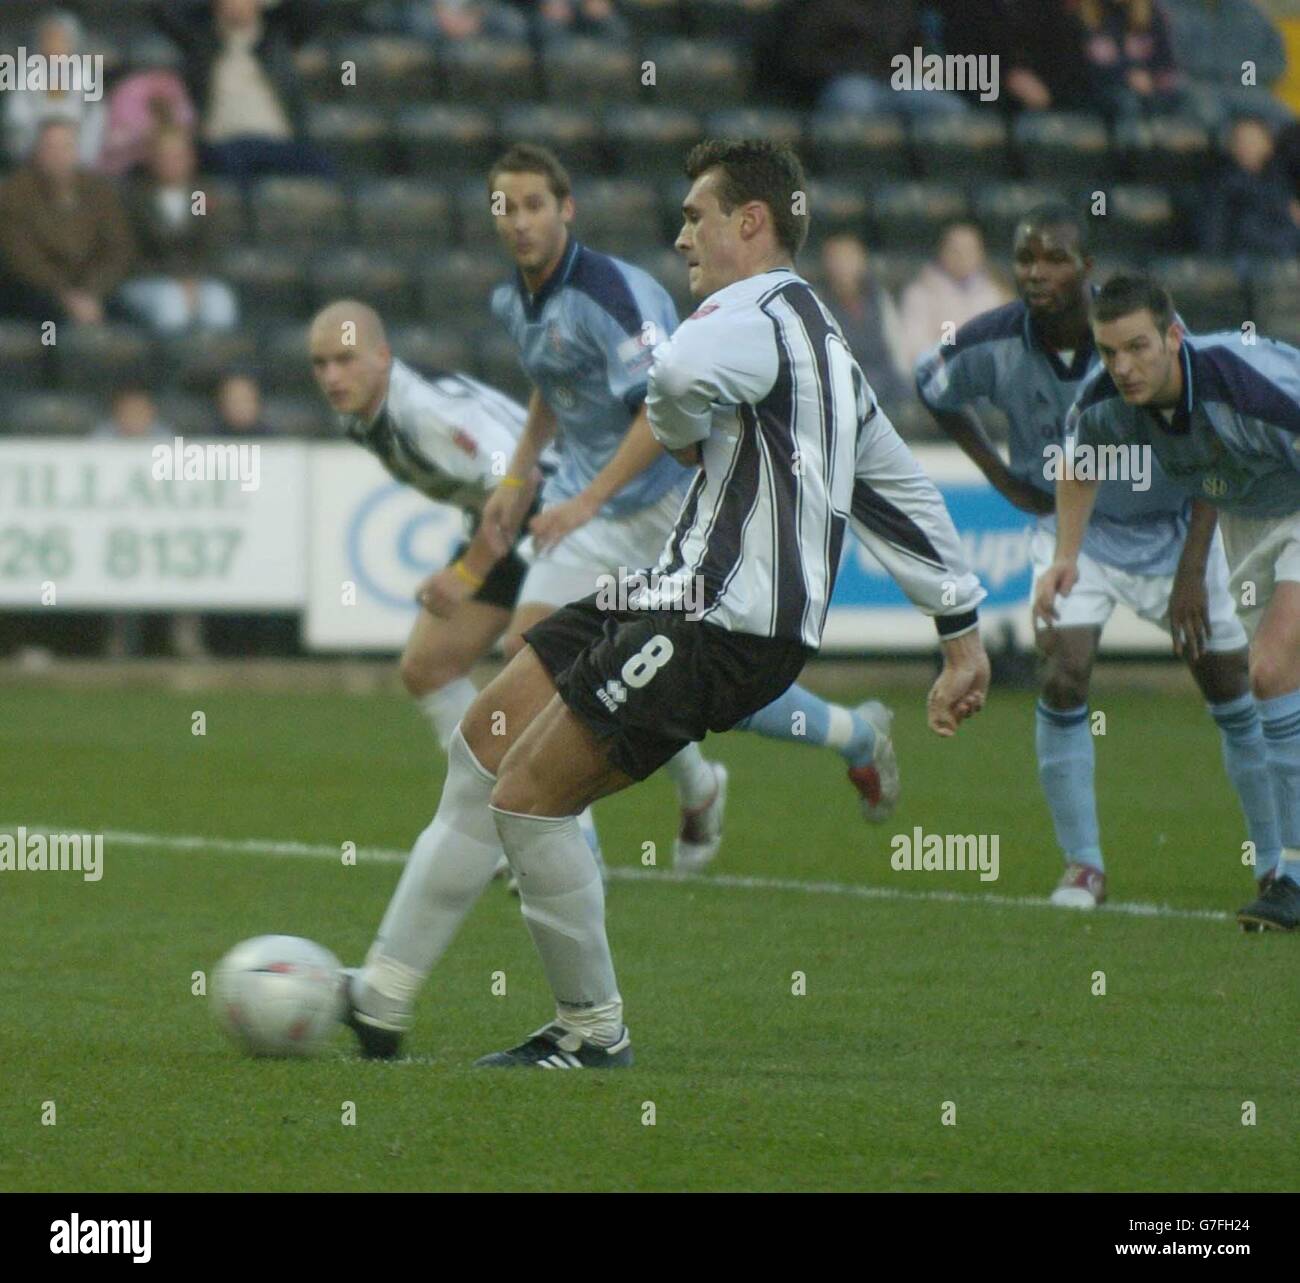 Notts County's Julien Baudet scores from the penalty spot to put County 1-0 up against Woking in the FA Cup First Round match at Meadow Lane, Nottingham, Saturday November 13, 2004. NO UNOFFICIAL CLUB WEBSITE USE. Stock Photo